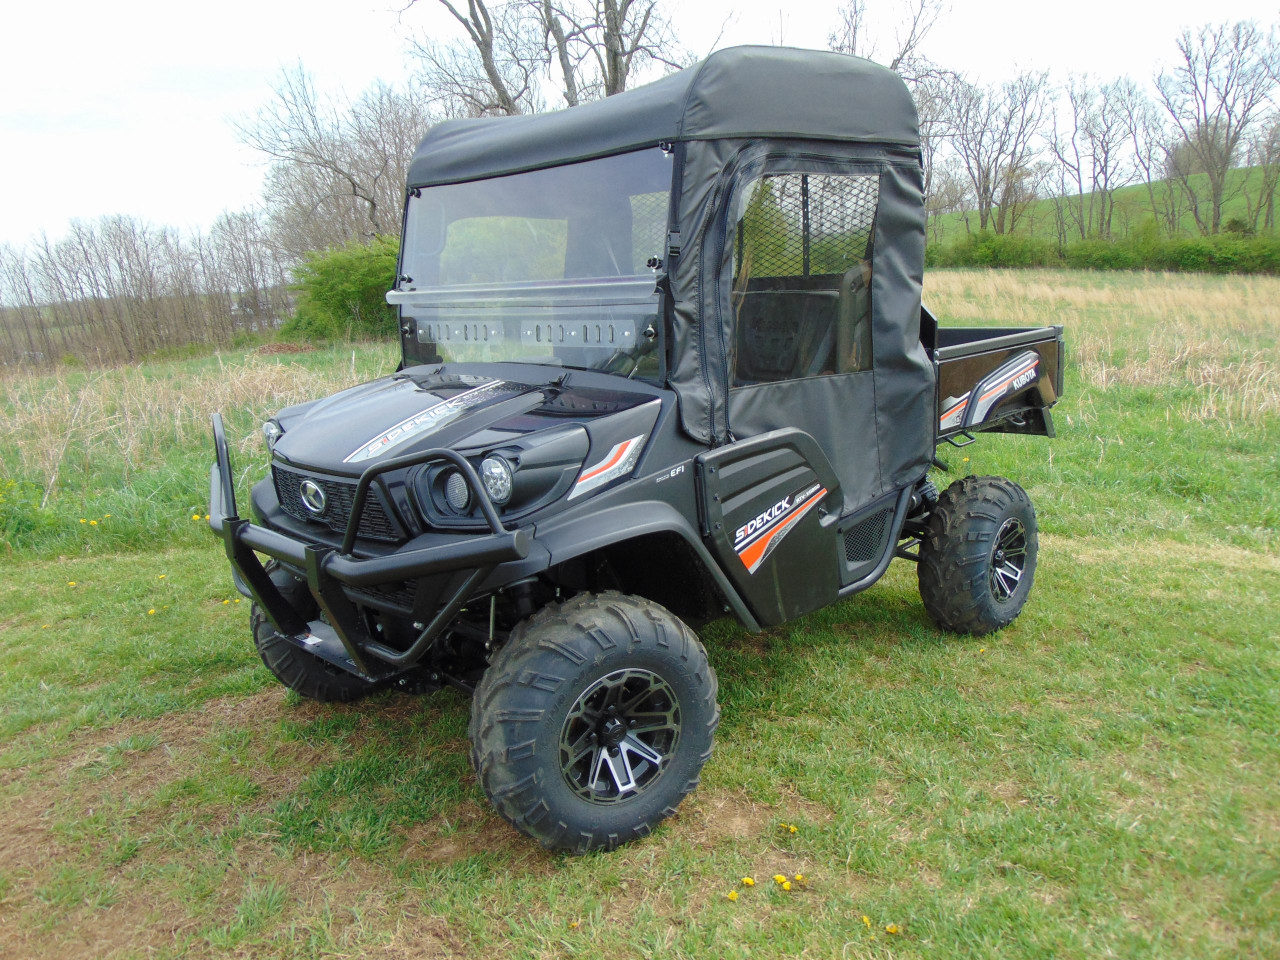 3 Star side x side Kubota RTV XG850 full cab enclosure front and side angle view